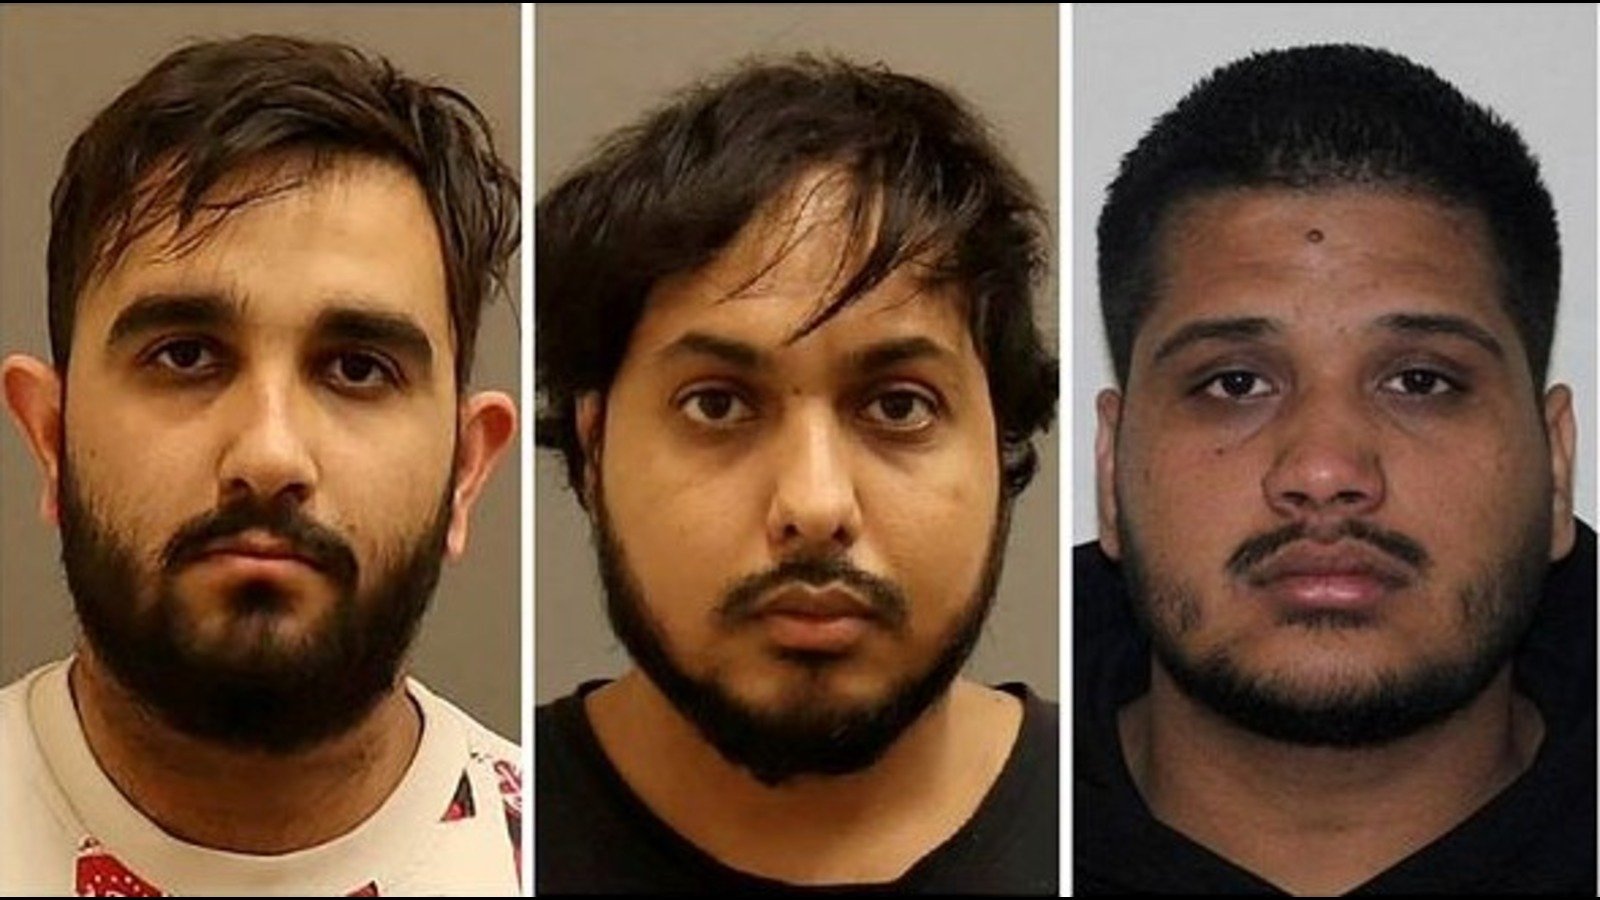 Kamalpreet Singh, 22, Karan Brar, 22, and Karanpreet Singh, 28, have been charged with first-degree murder and conspiracy to commit murder. (Reuters) image